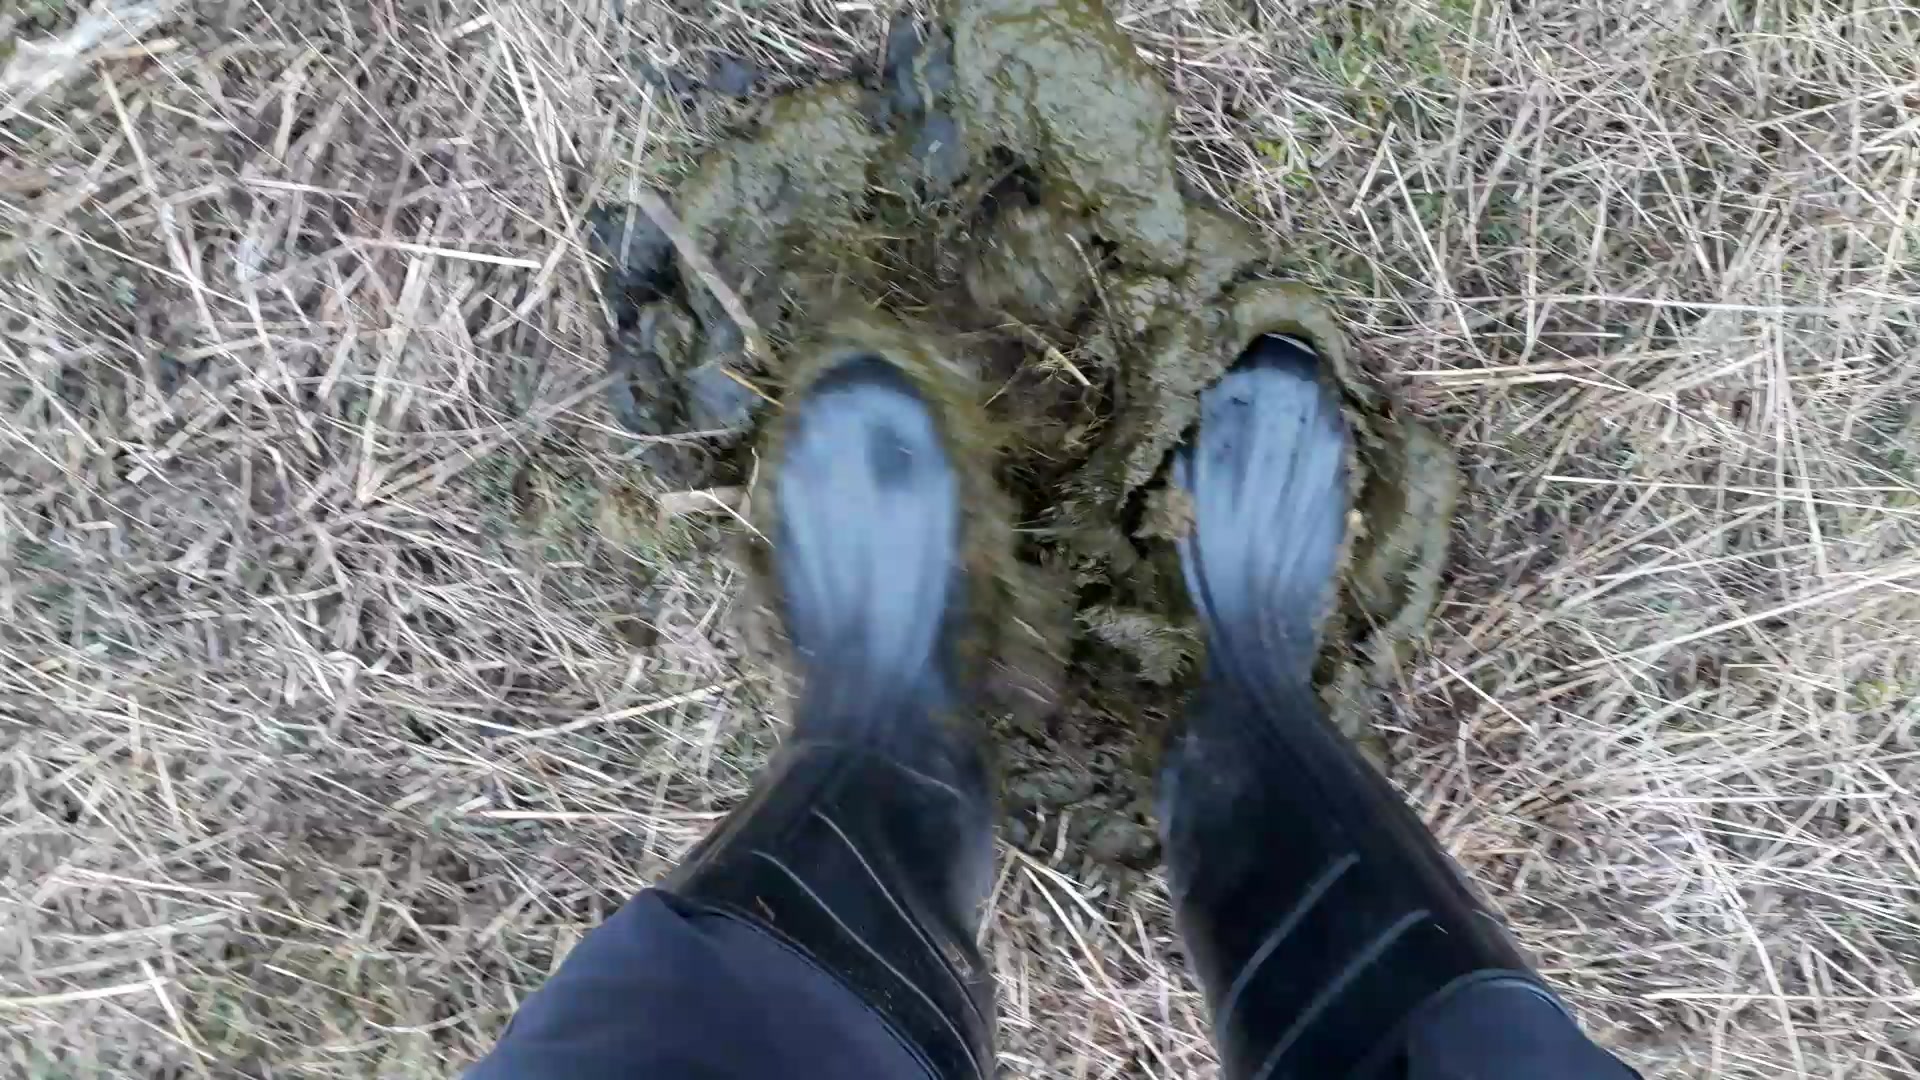 Rubber boots vs cowshit - video 22